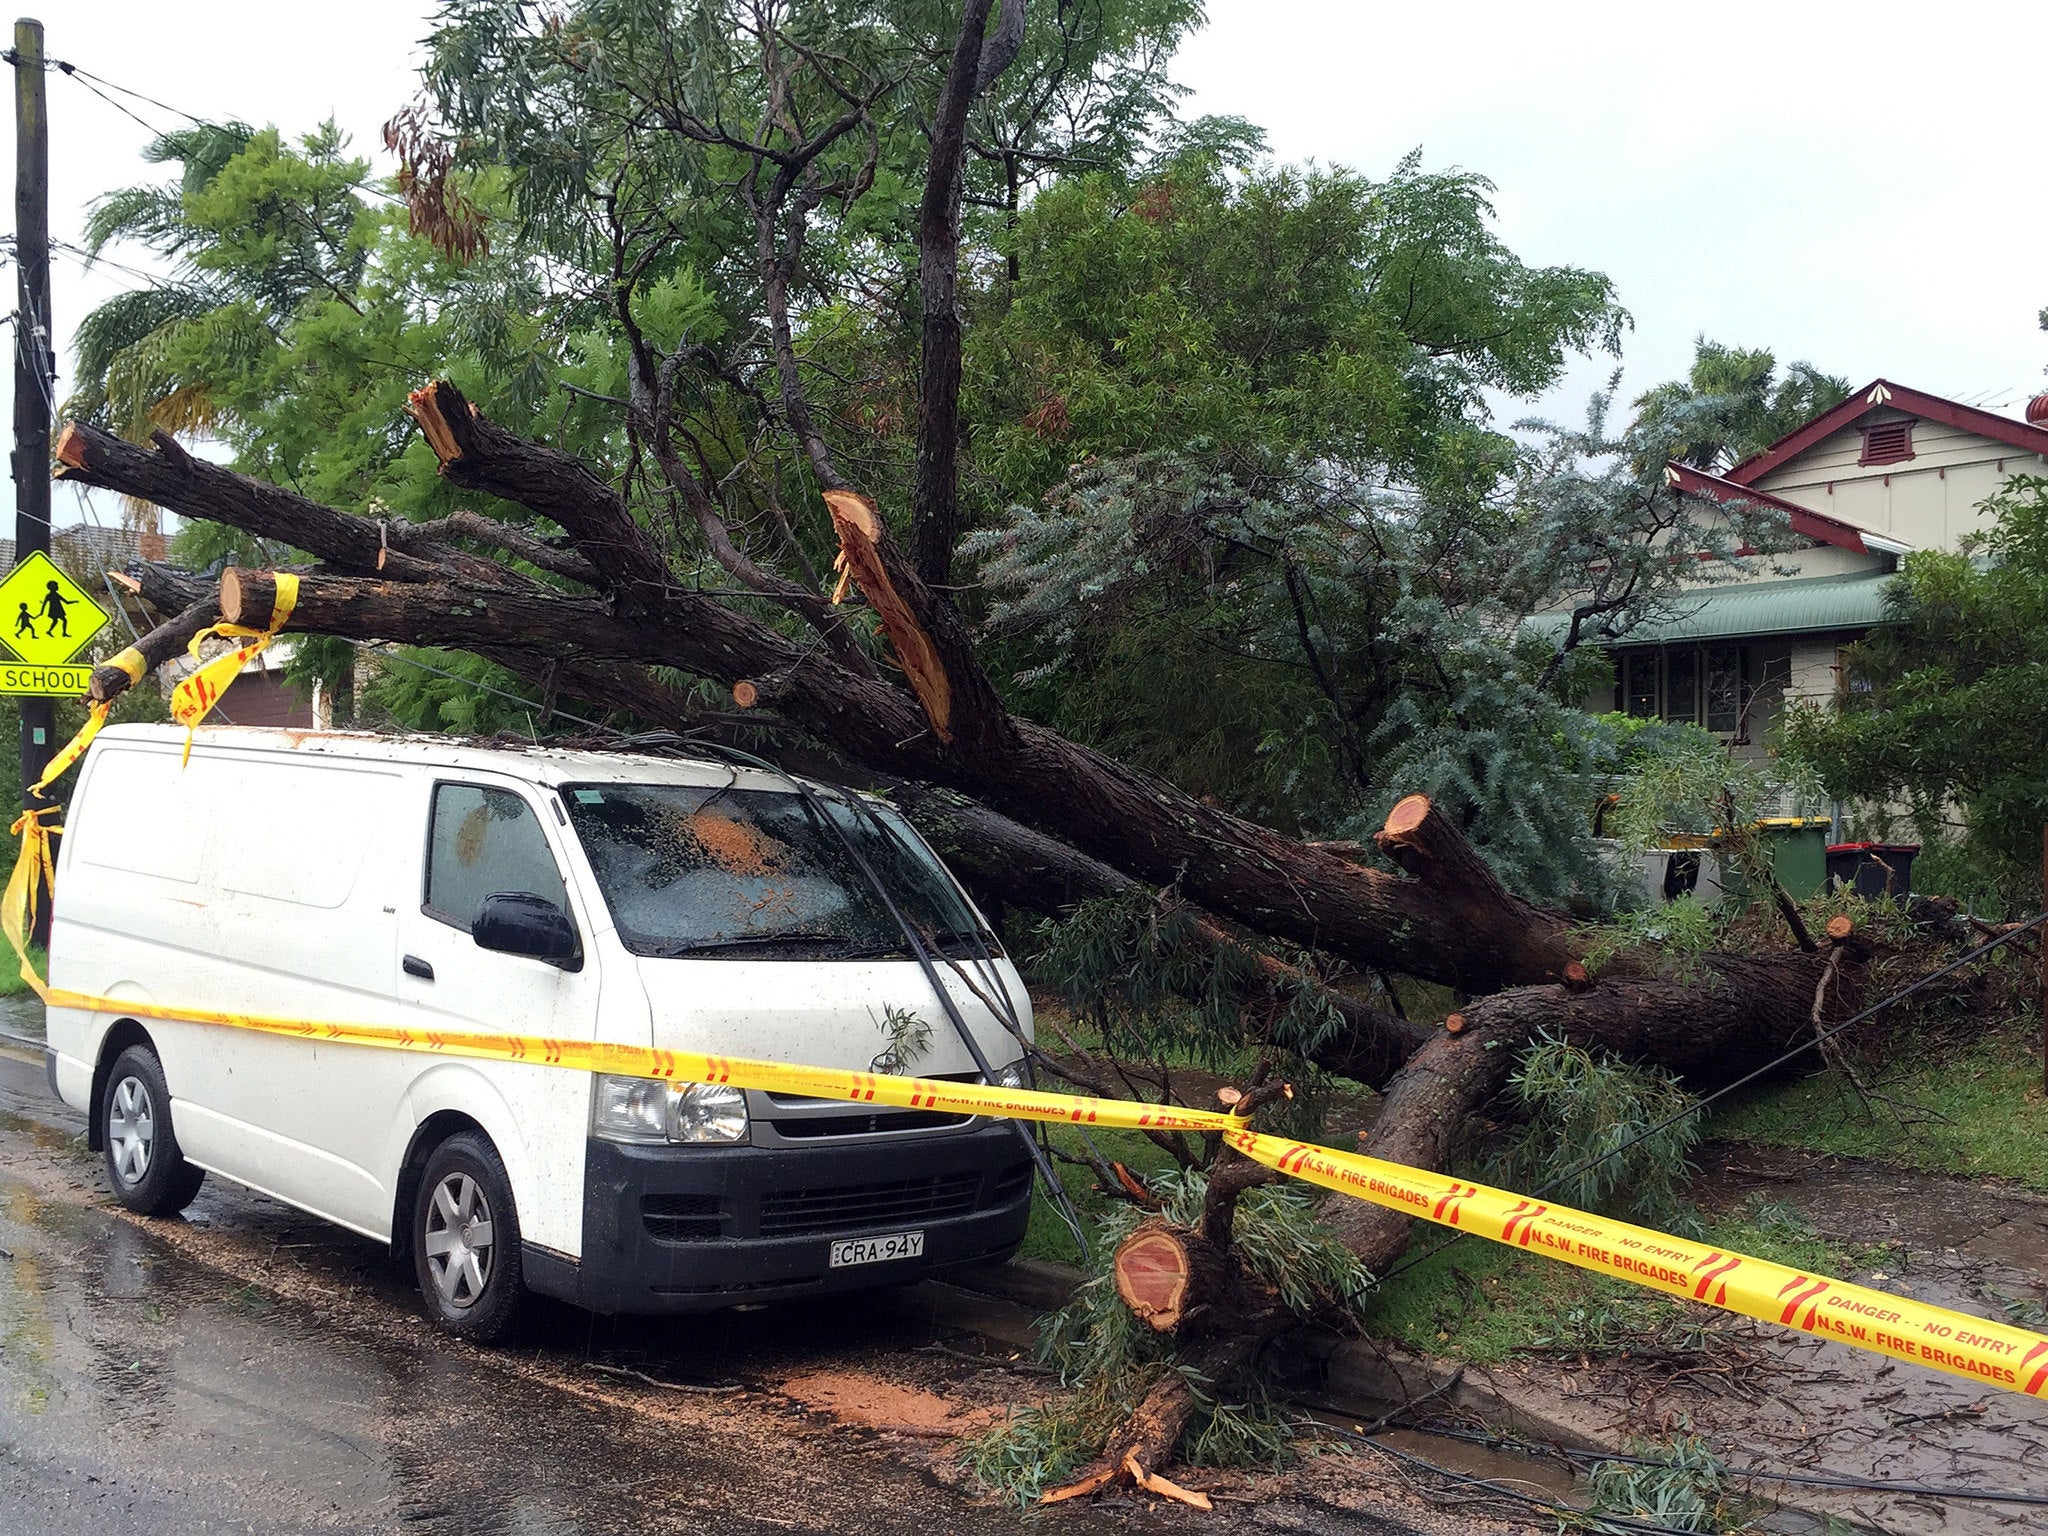 An uprooted tree crashed into a car during the storm in suburban Sydney